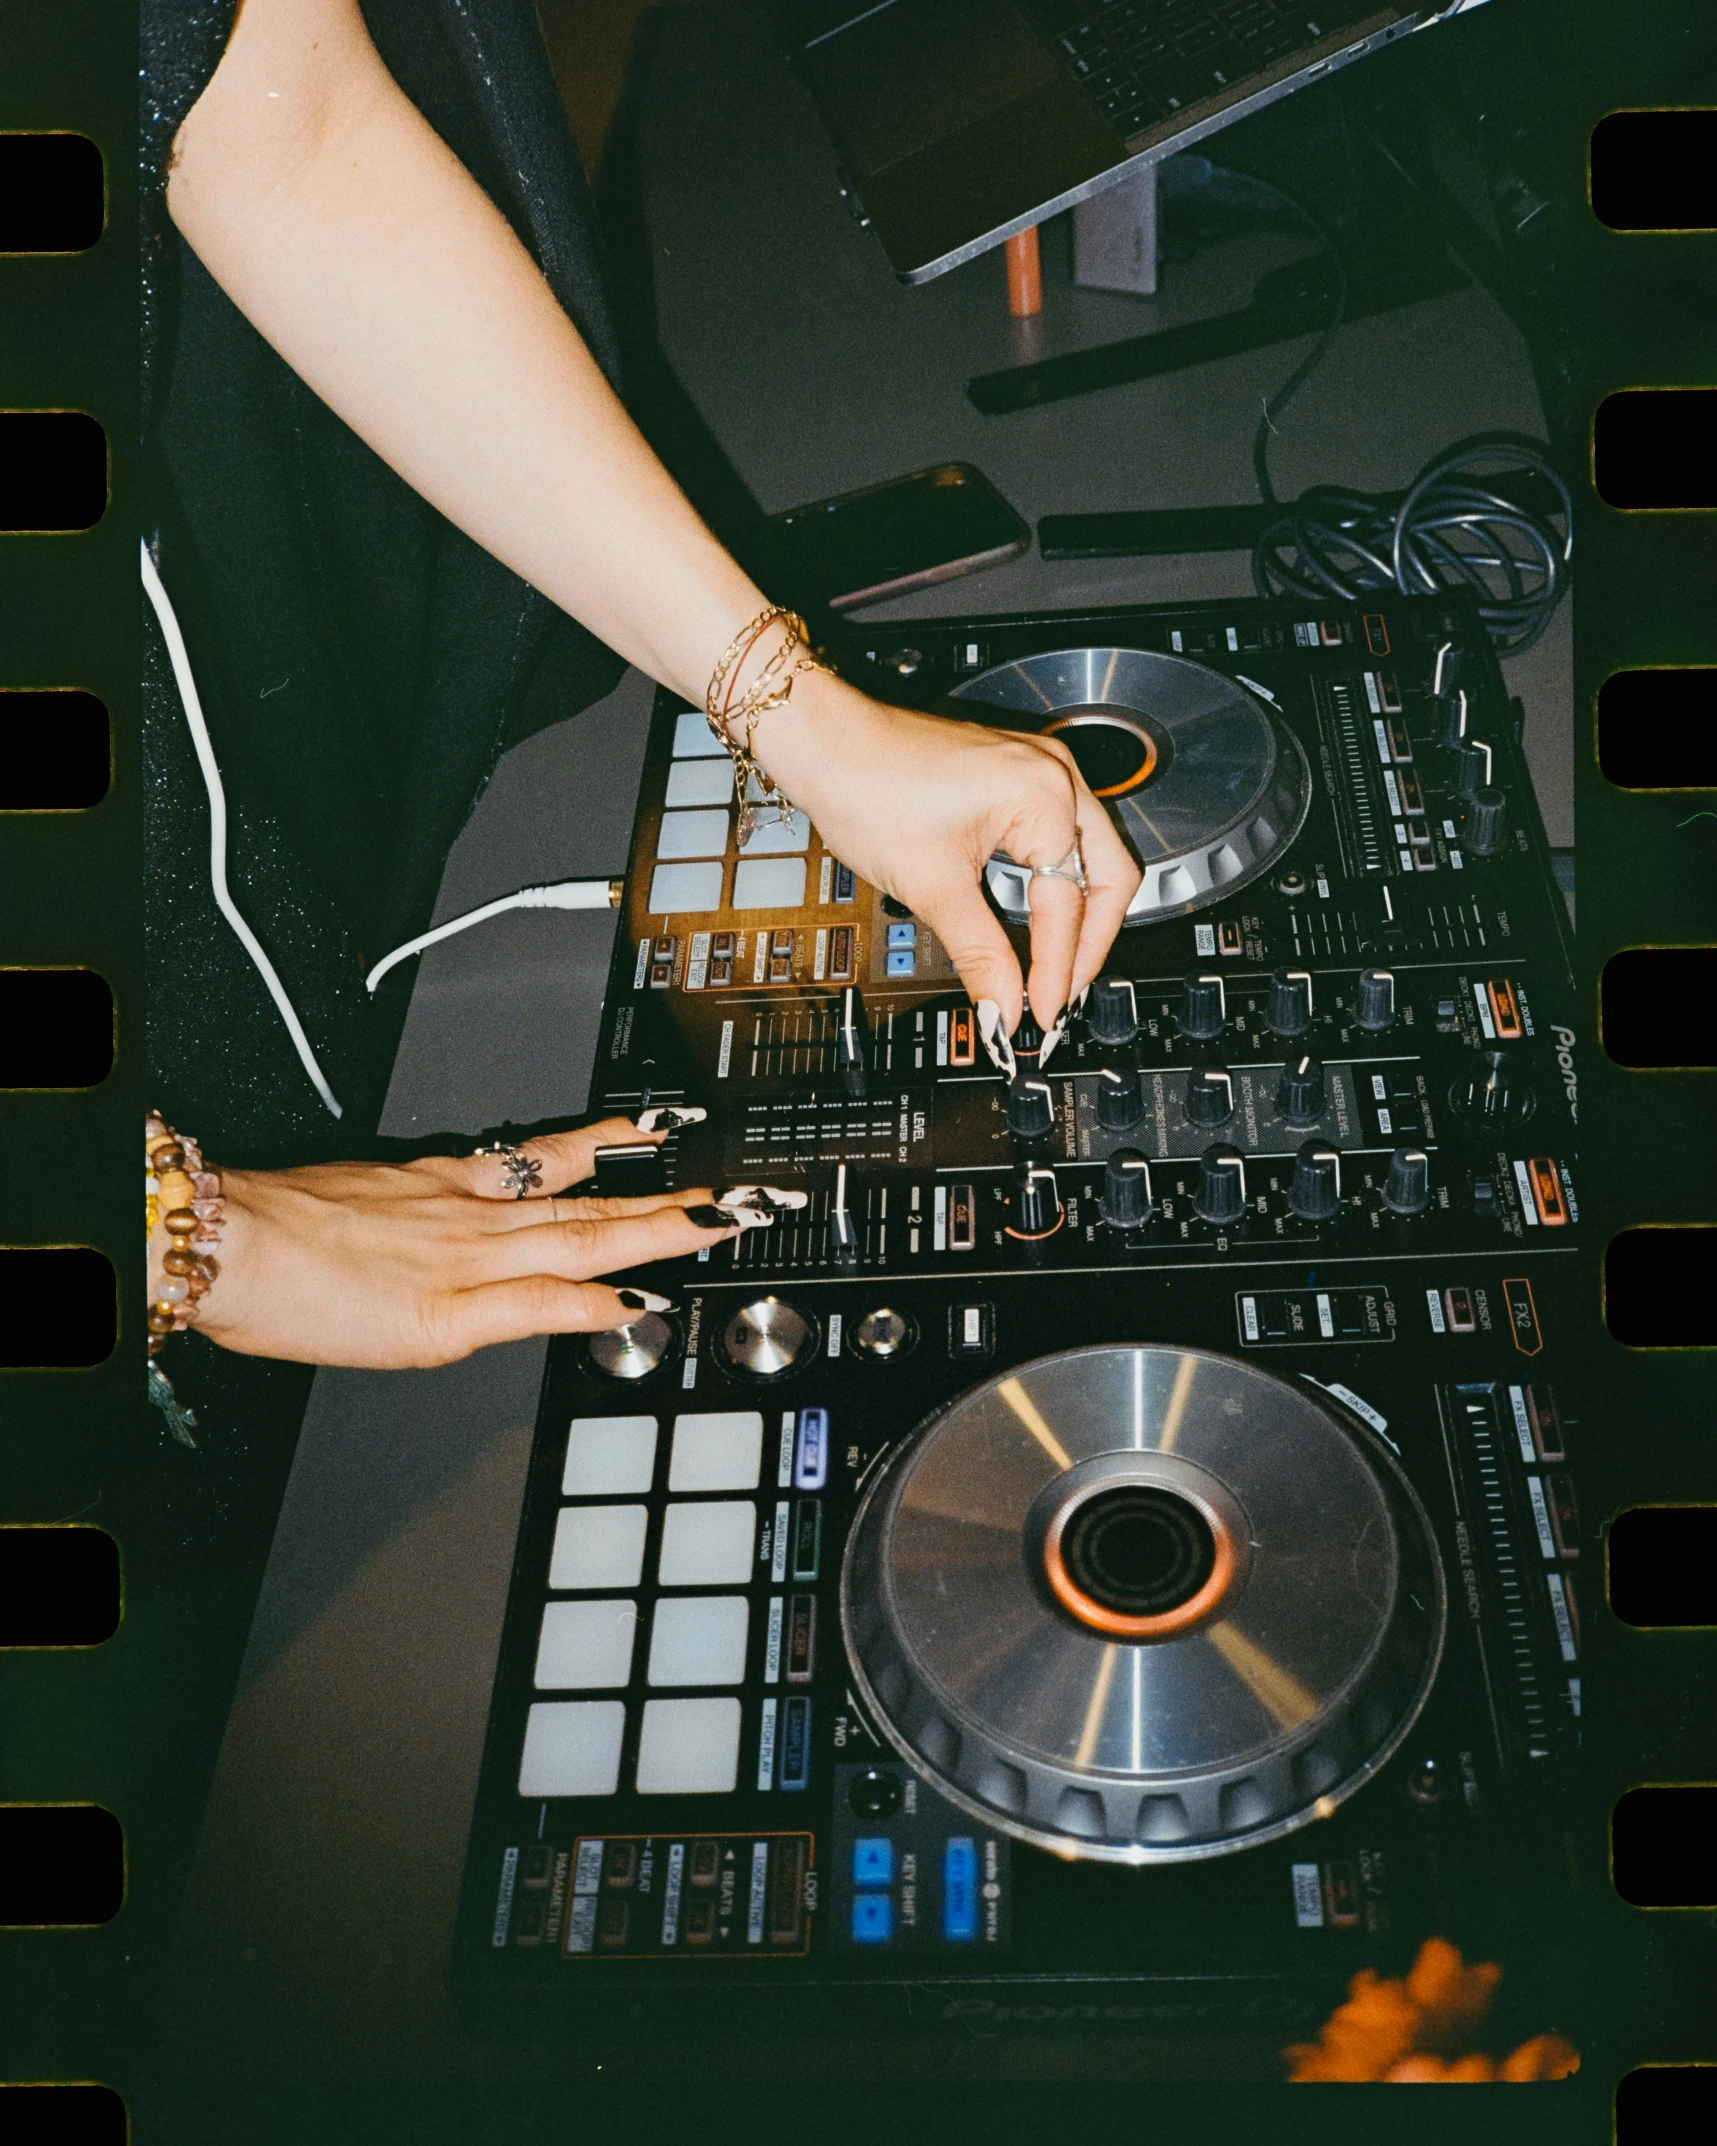 a close up of two people touching a dj turntable